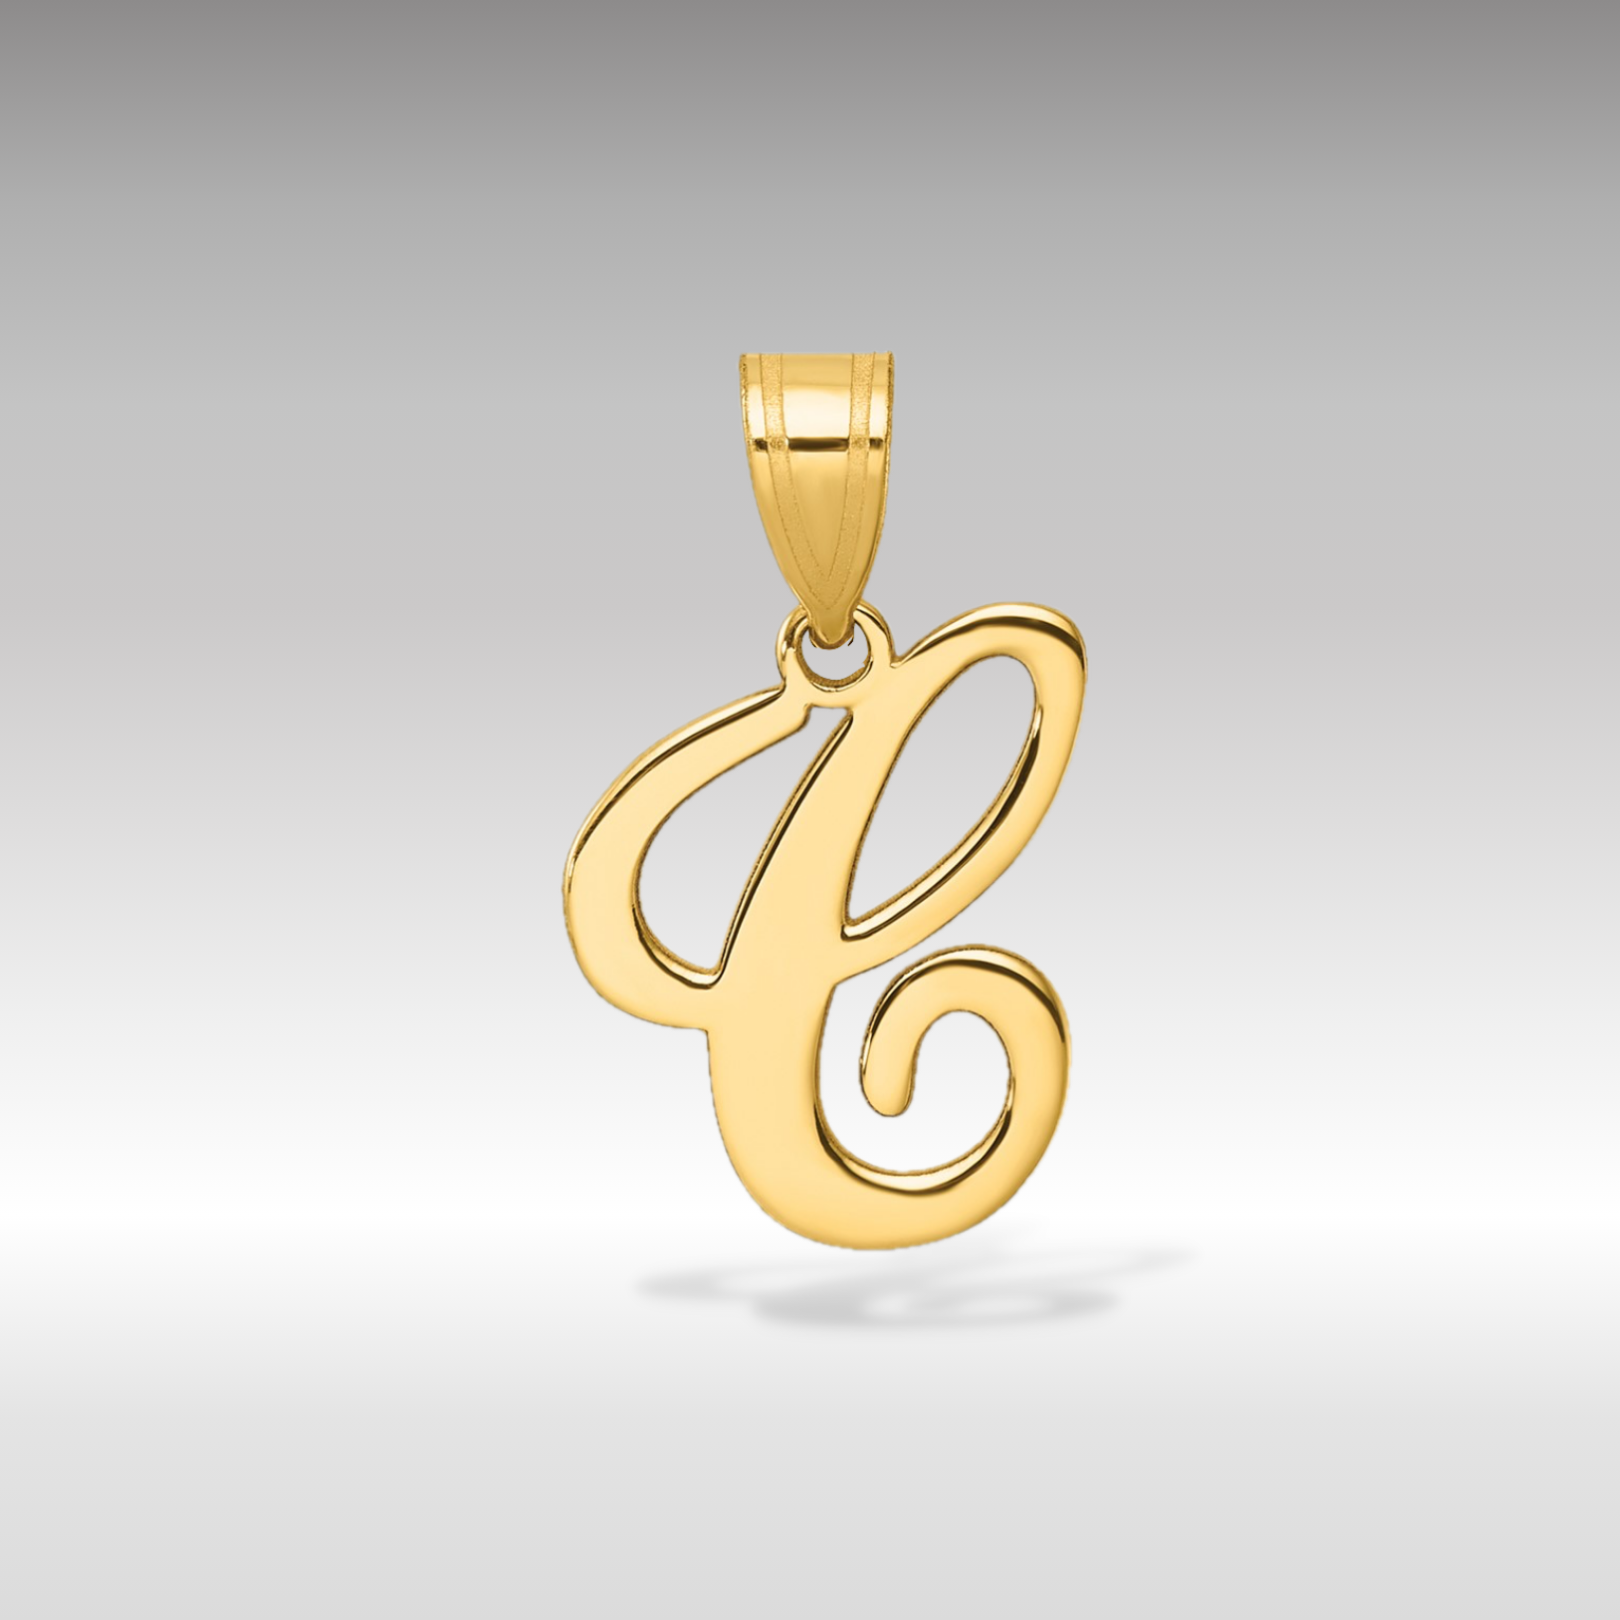 14K Gold Large Letter "C" Script Initial Pendant - Charlie & Co. Jewelry